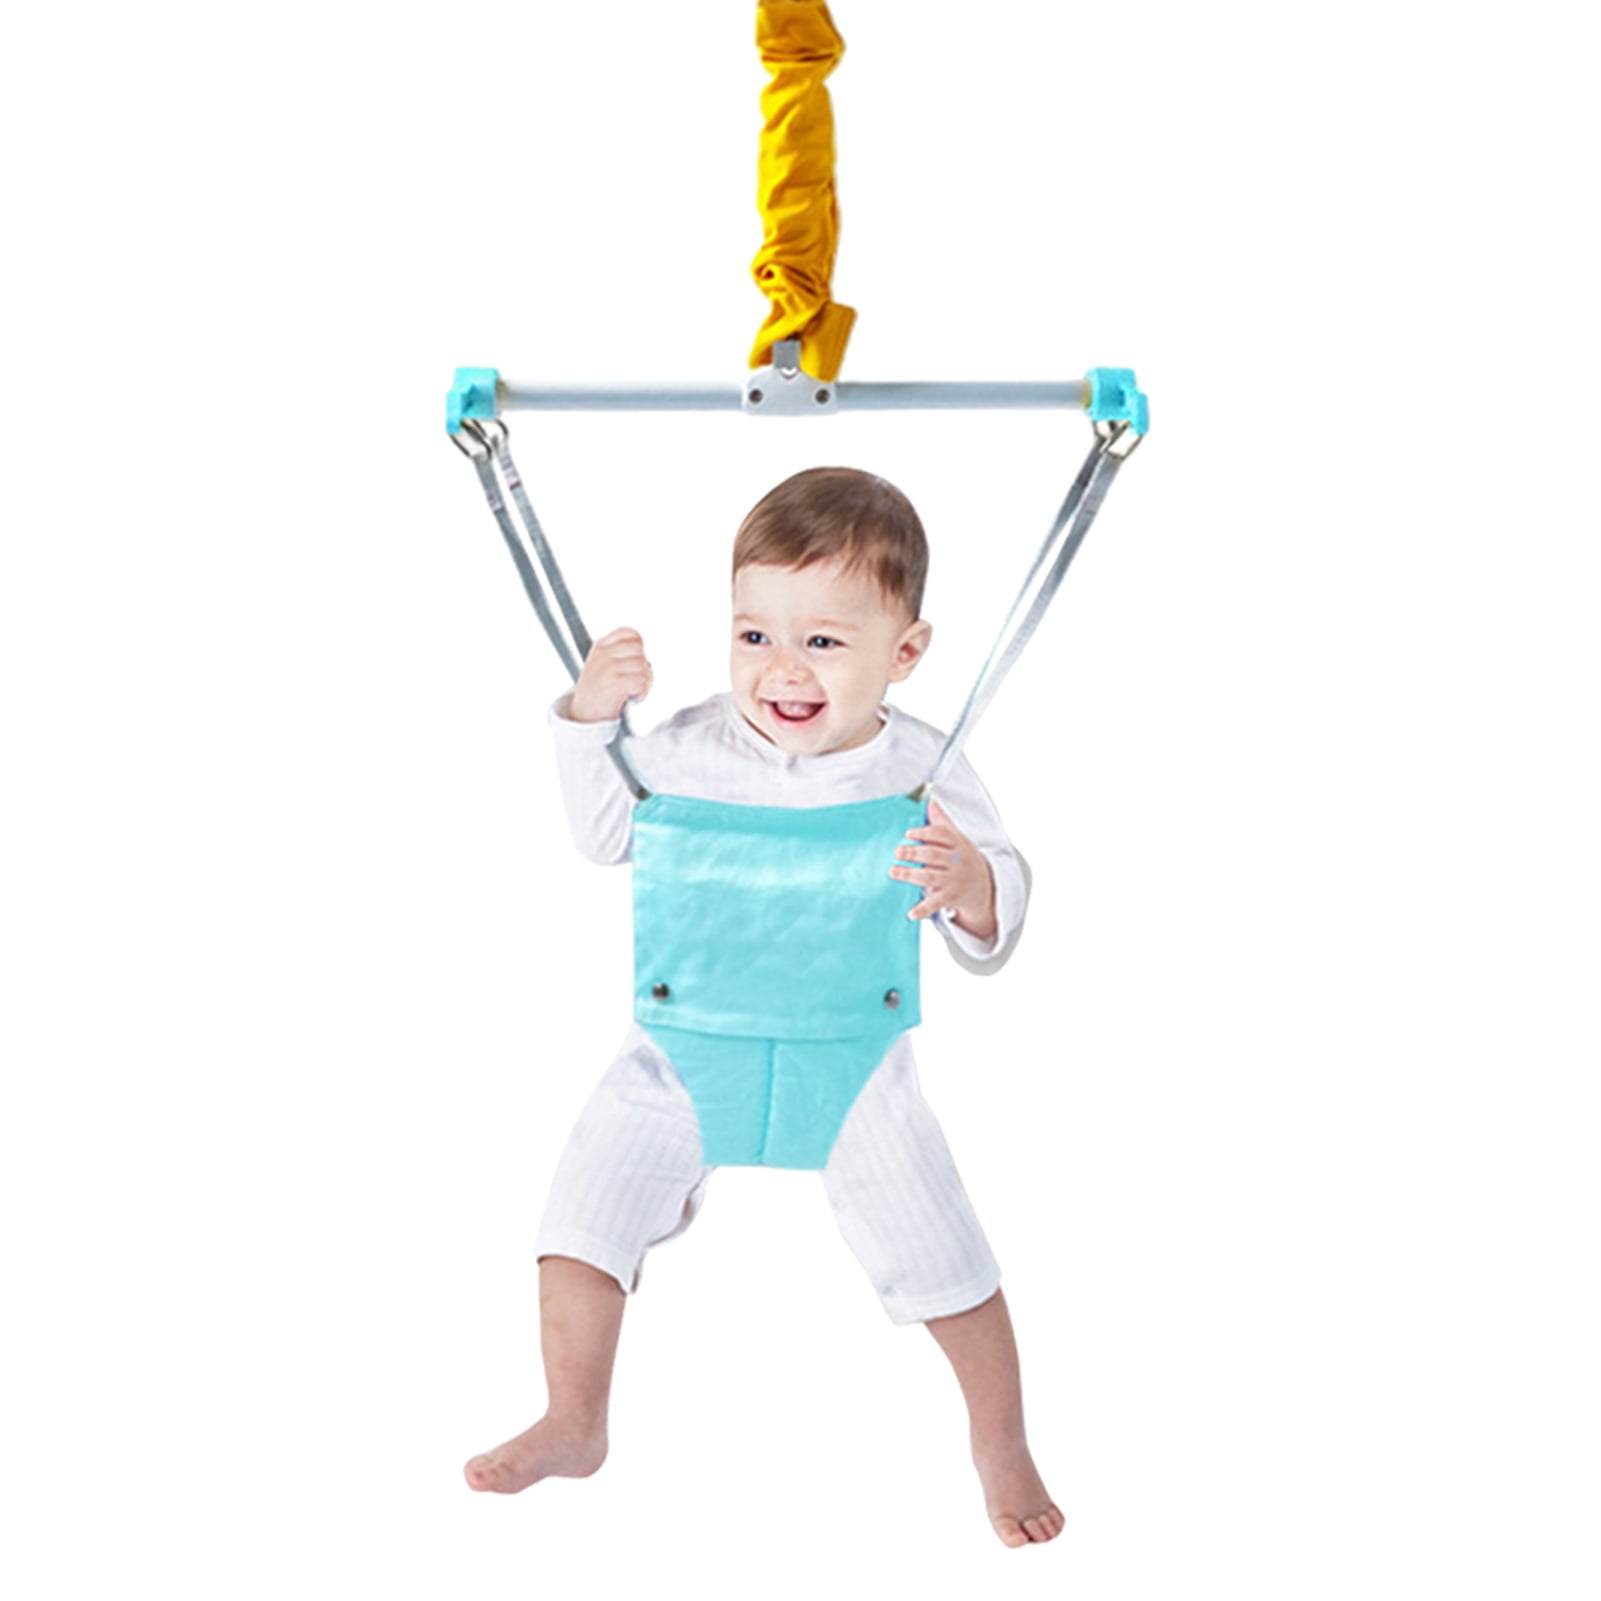 A/O Baby Door Jumper Baby Jumper Swing Fabric Toddler Doorway Bouncer with Clamp Adjustable for 6-24 Months Toddler Infant Without Bracket Blue 